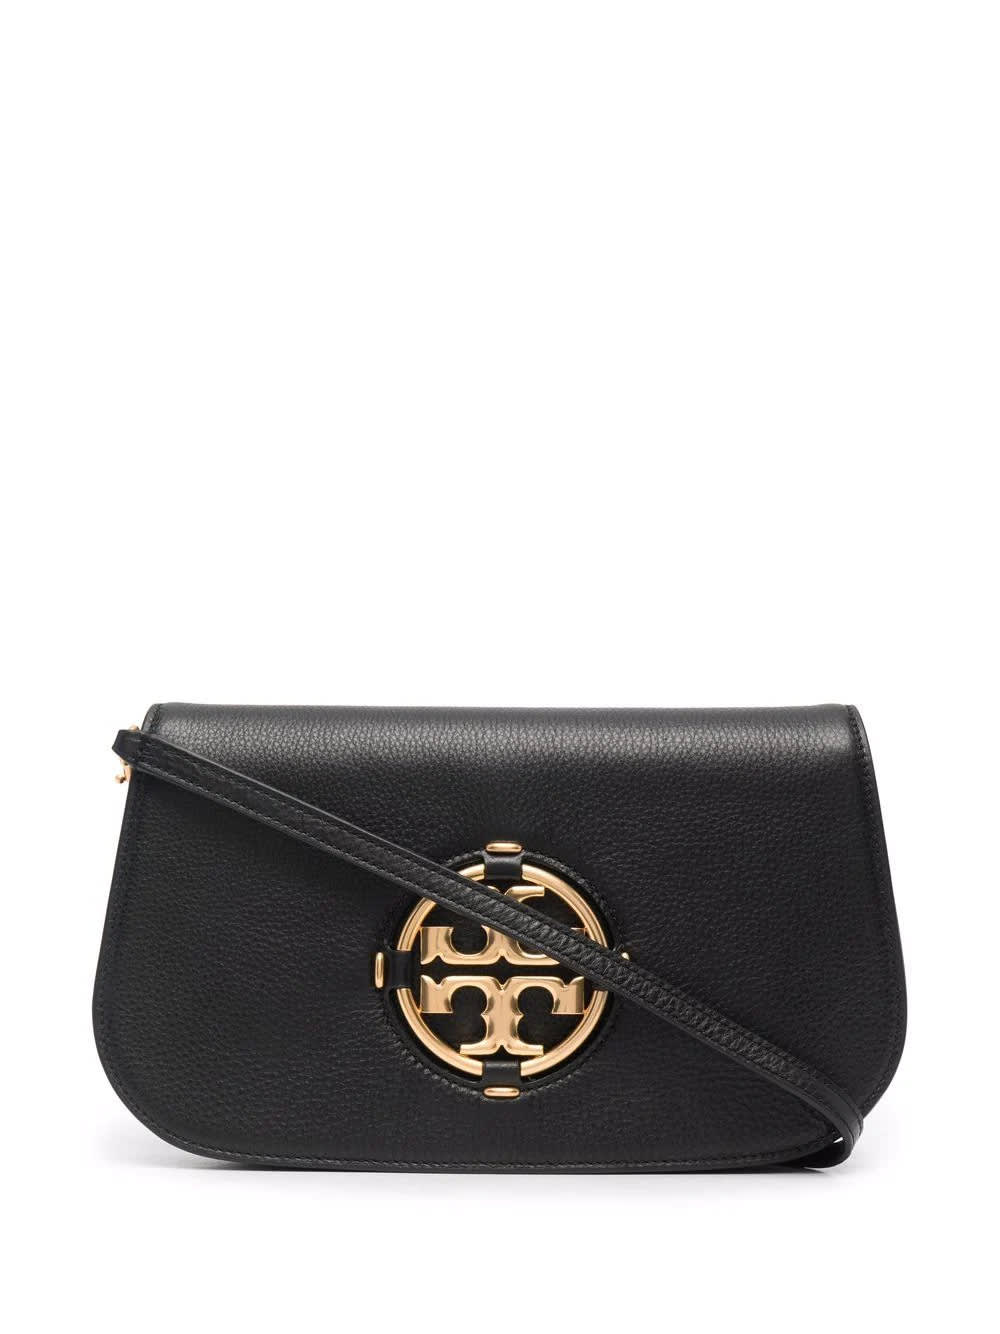 Tory Burch Miller Small Convertible Bag In Black Leather